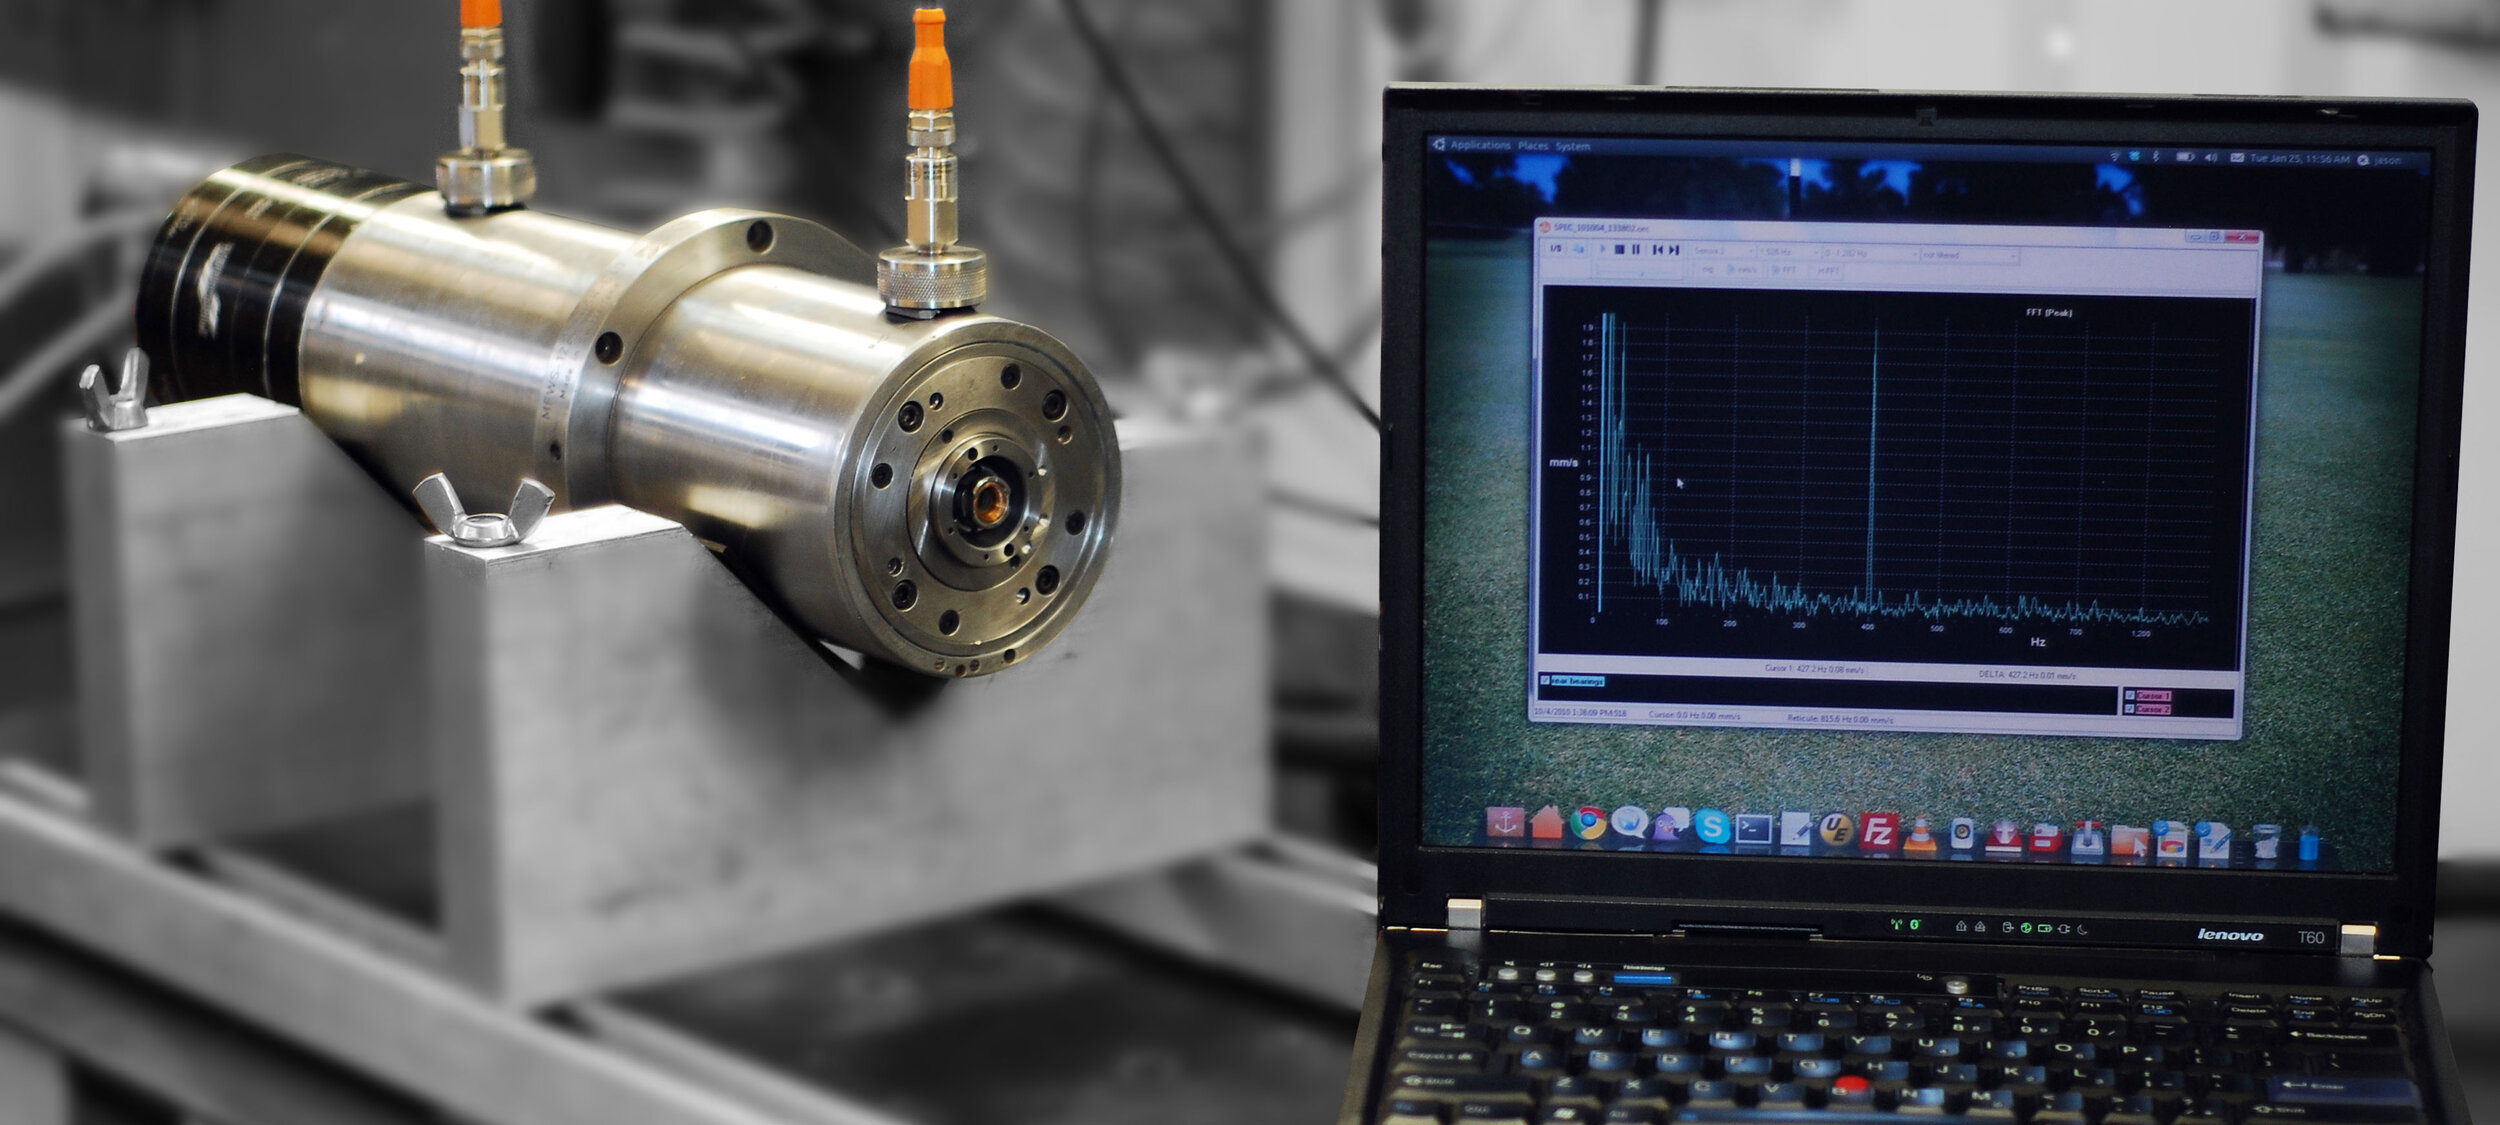 spindle test run on stand with vibration analysis